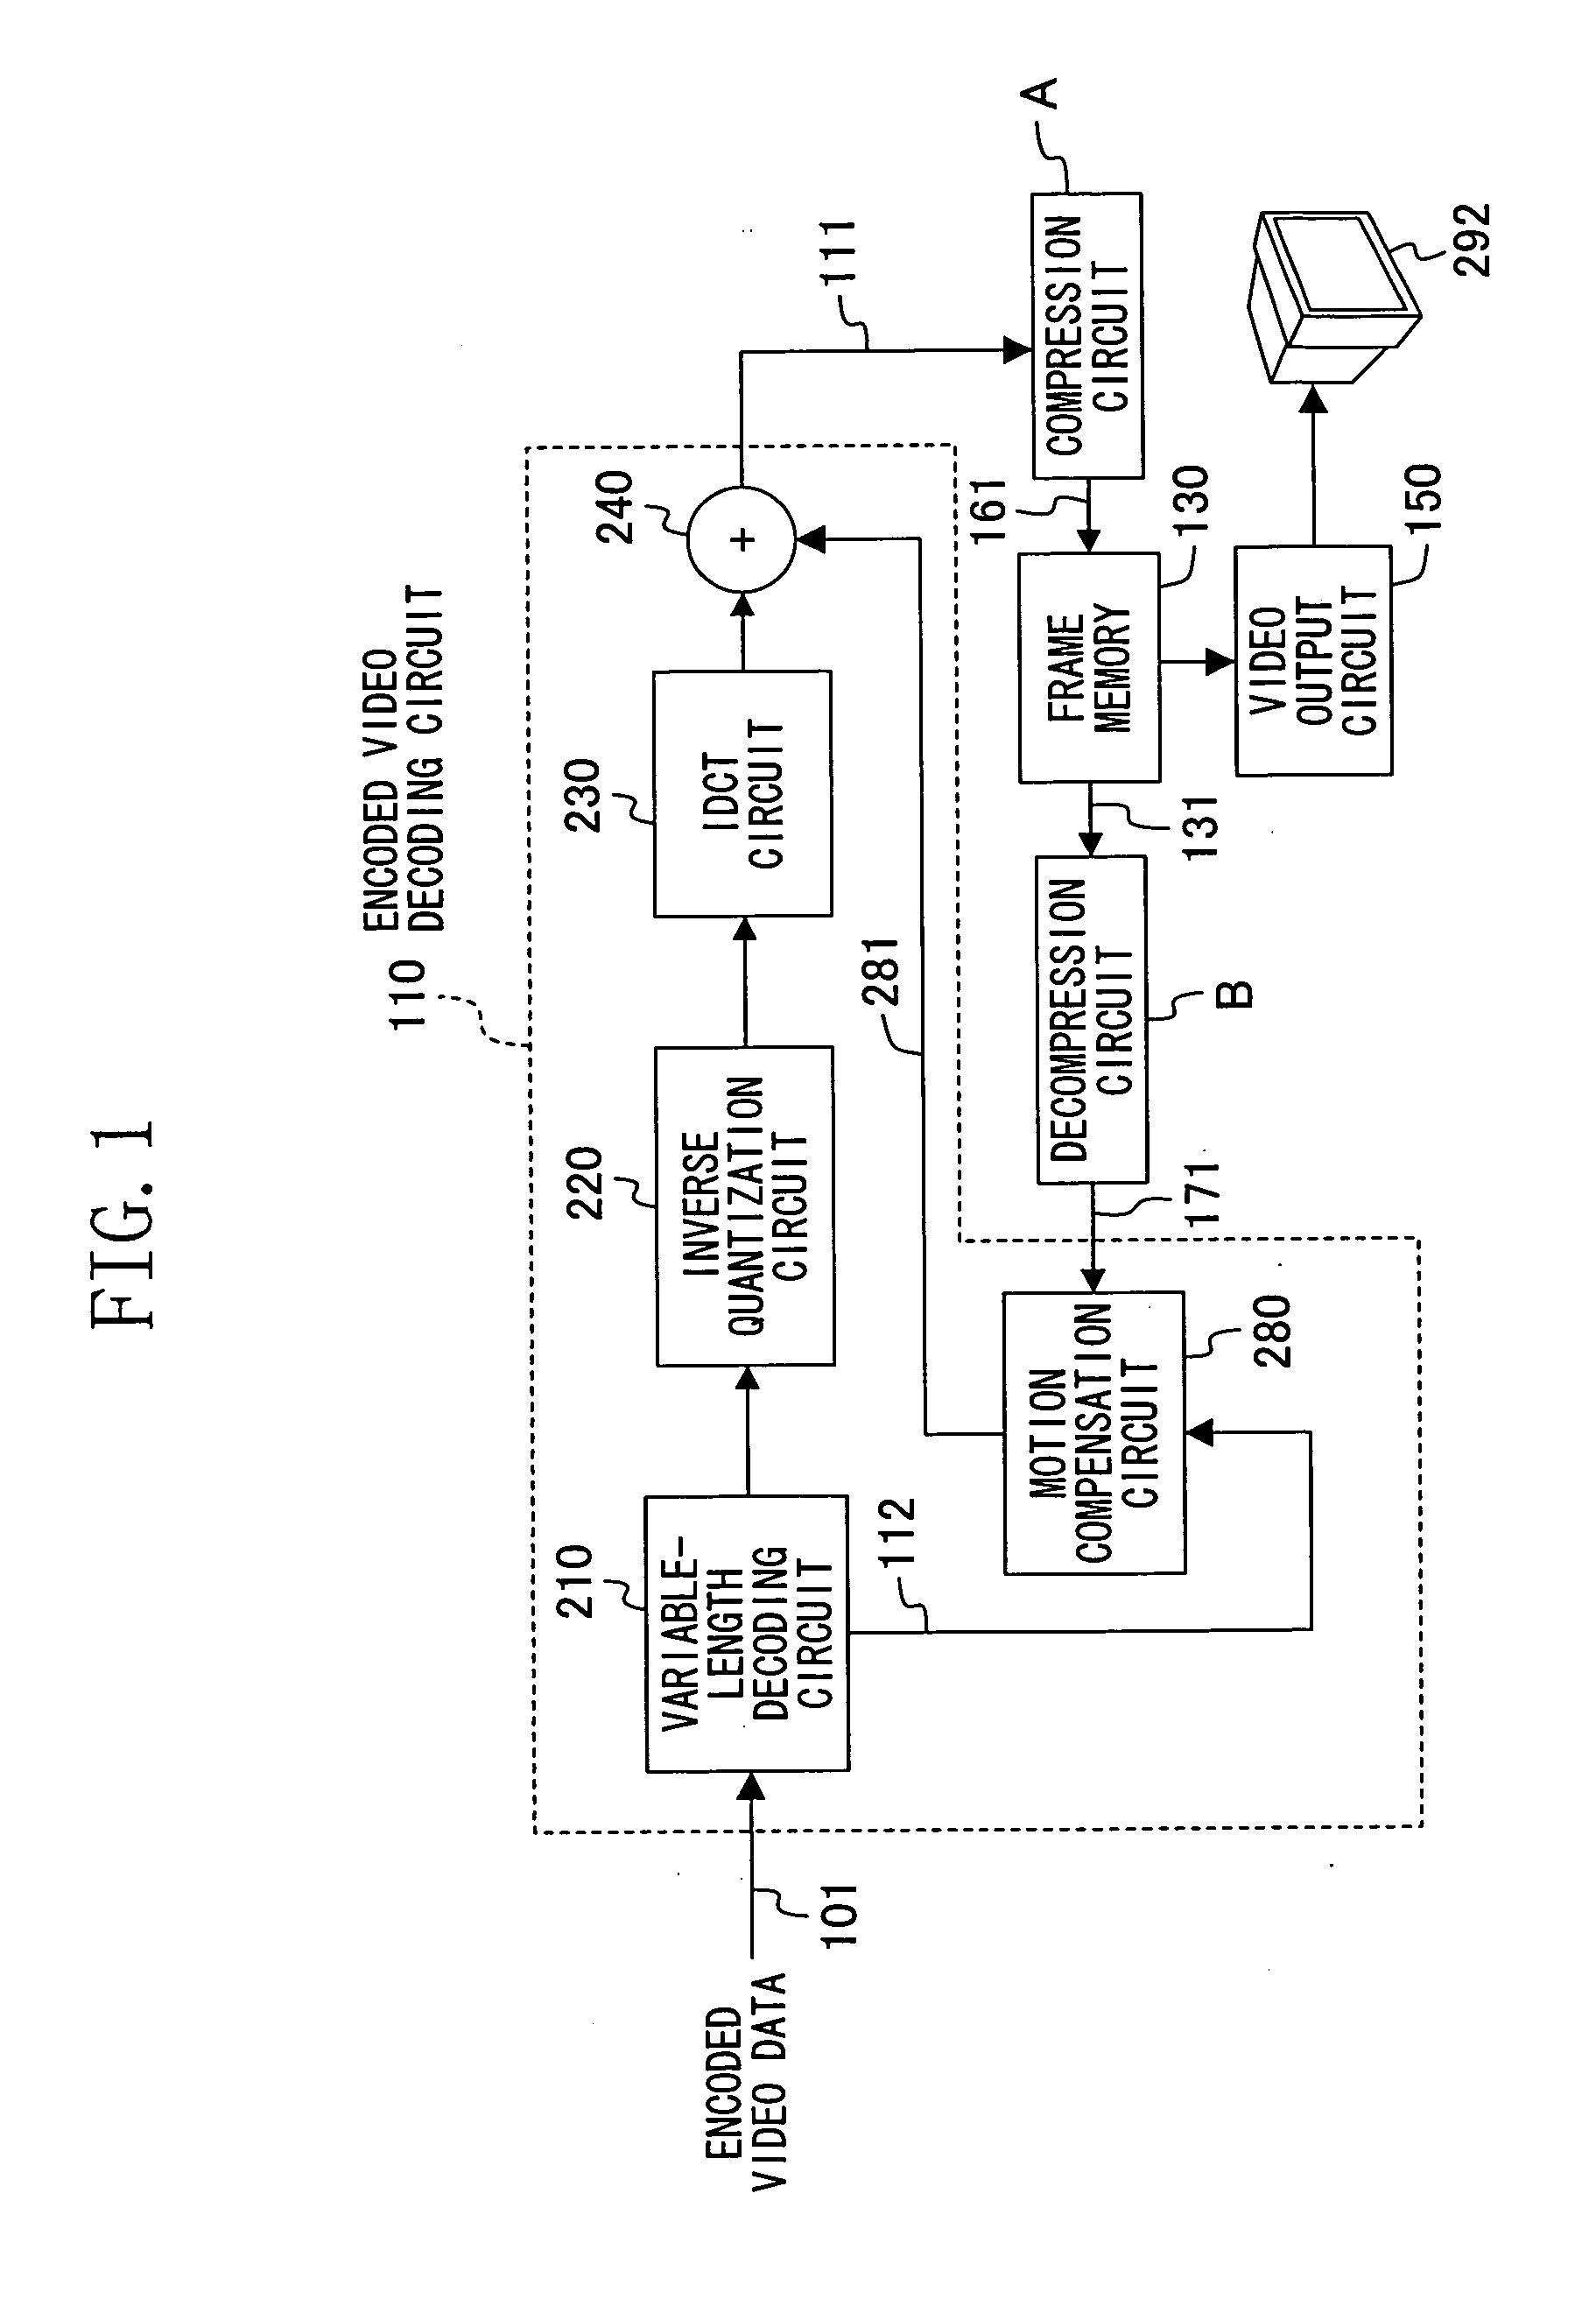 Video playback device